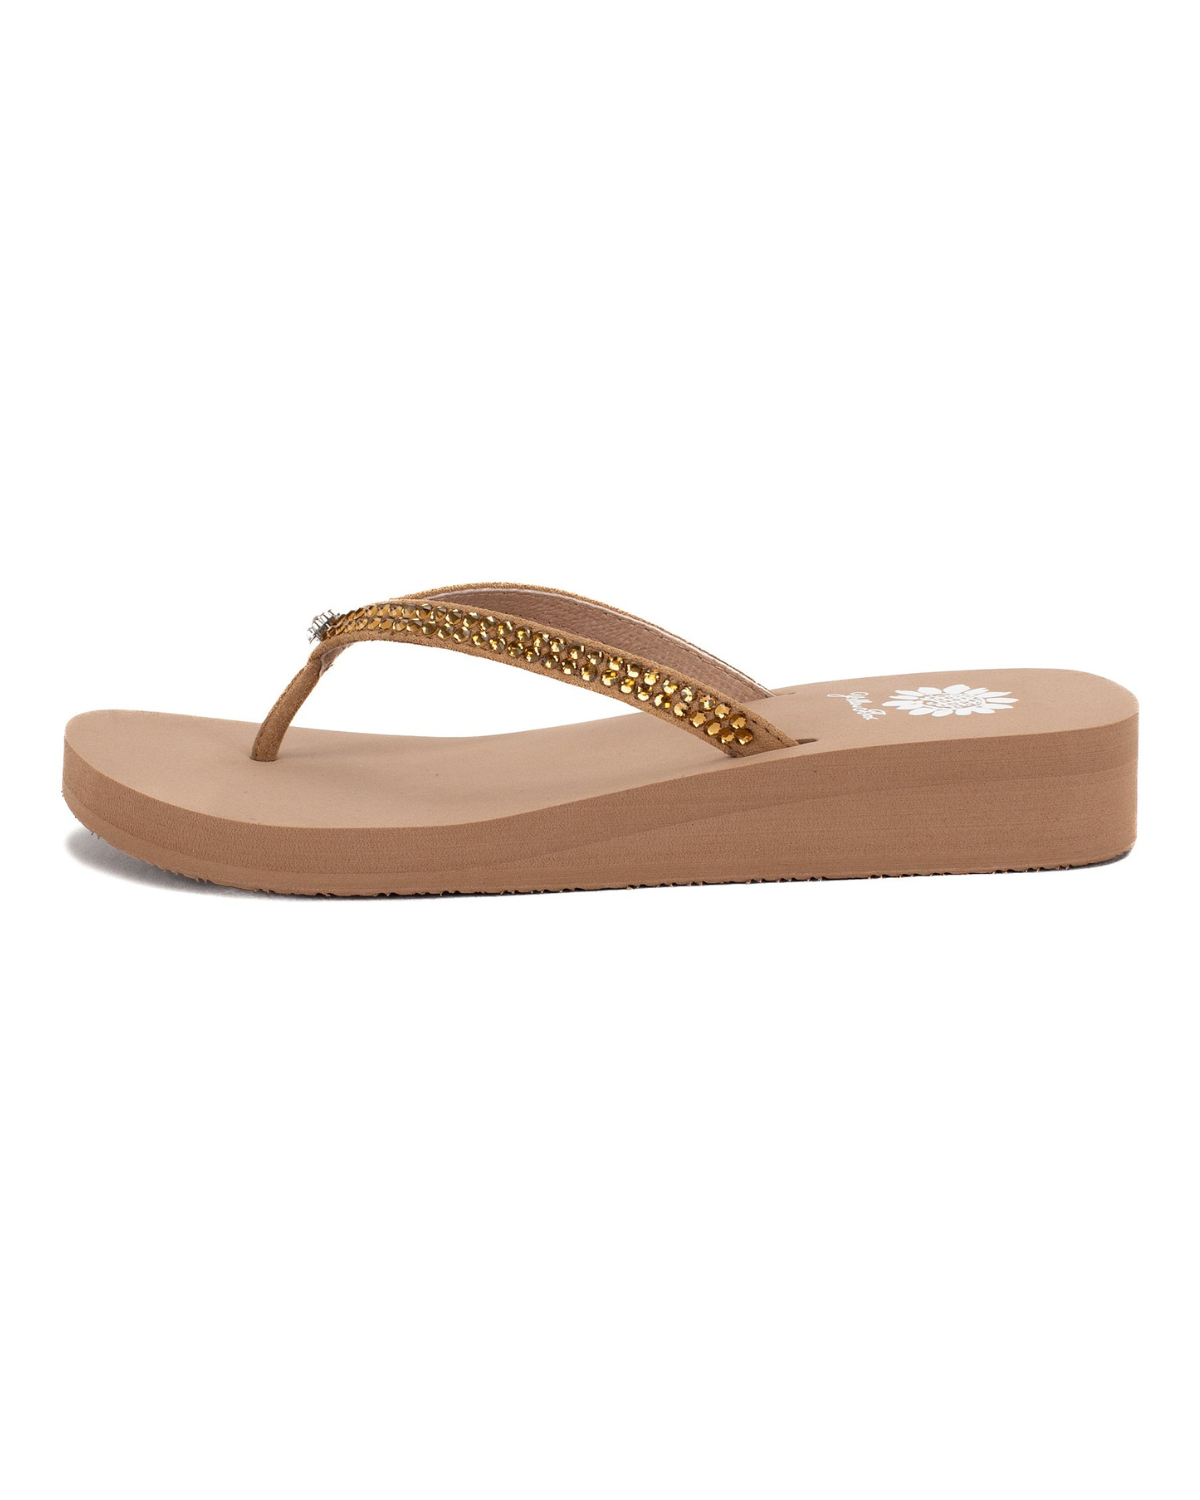 Women's tan wedge sandal with brown rhinestones on the strap.